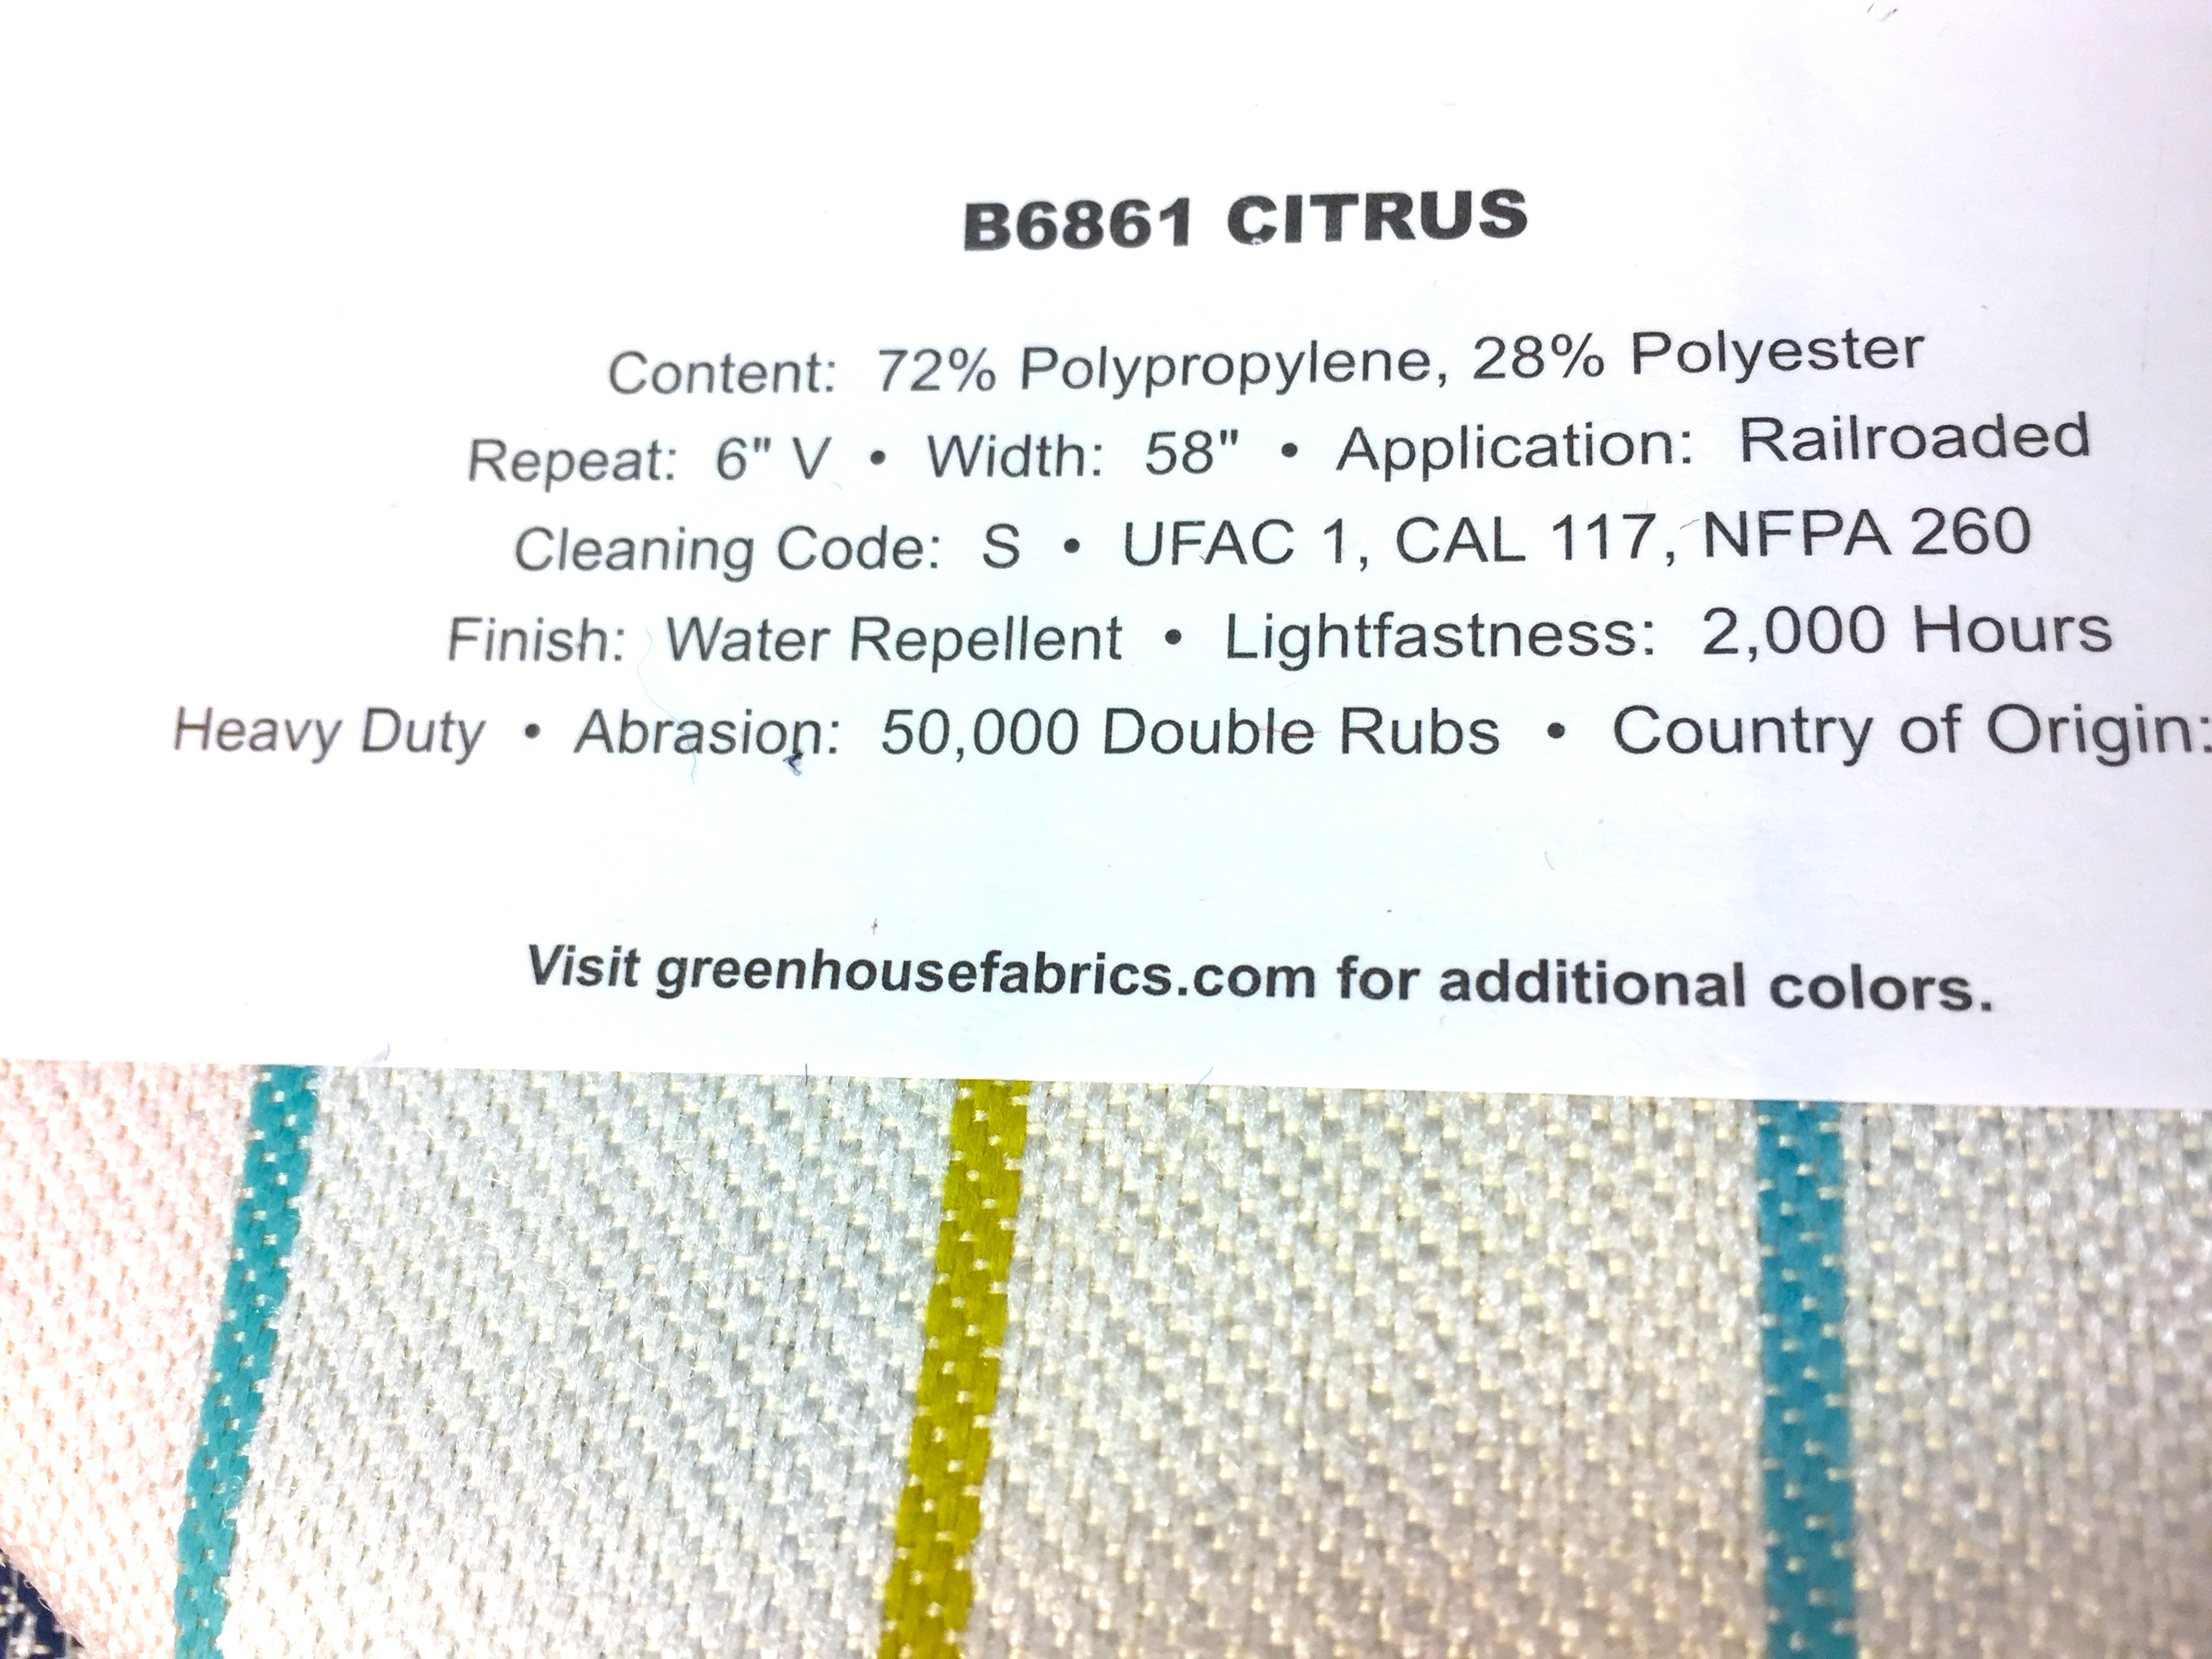 Upholsterry fabric 2000 hours light fastness